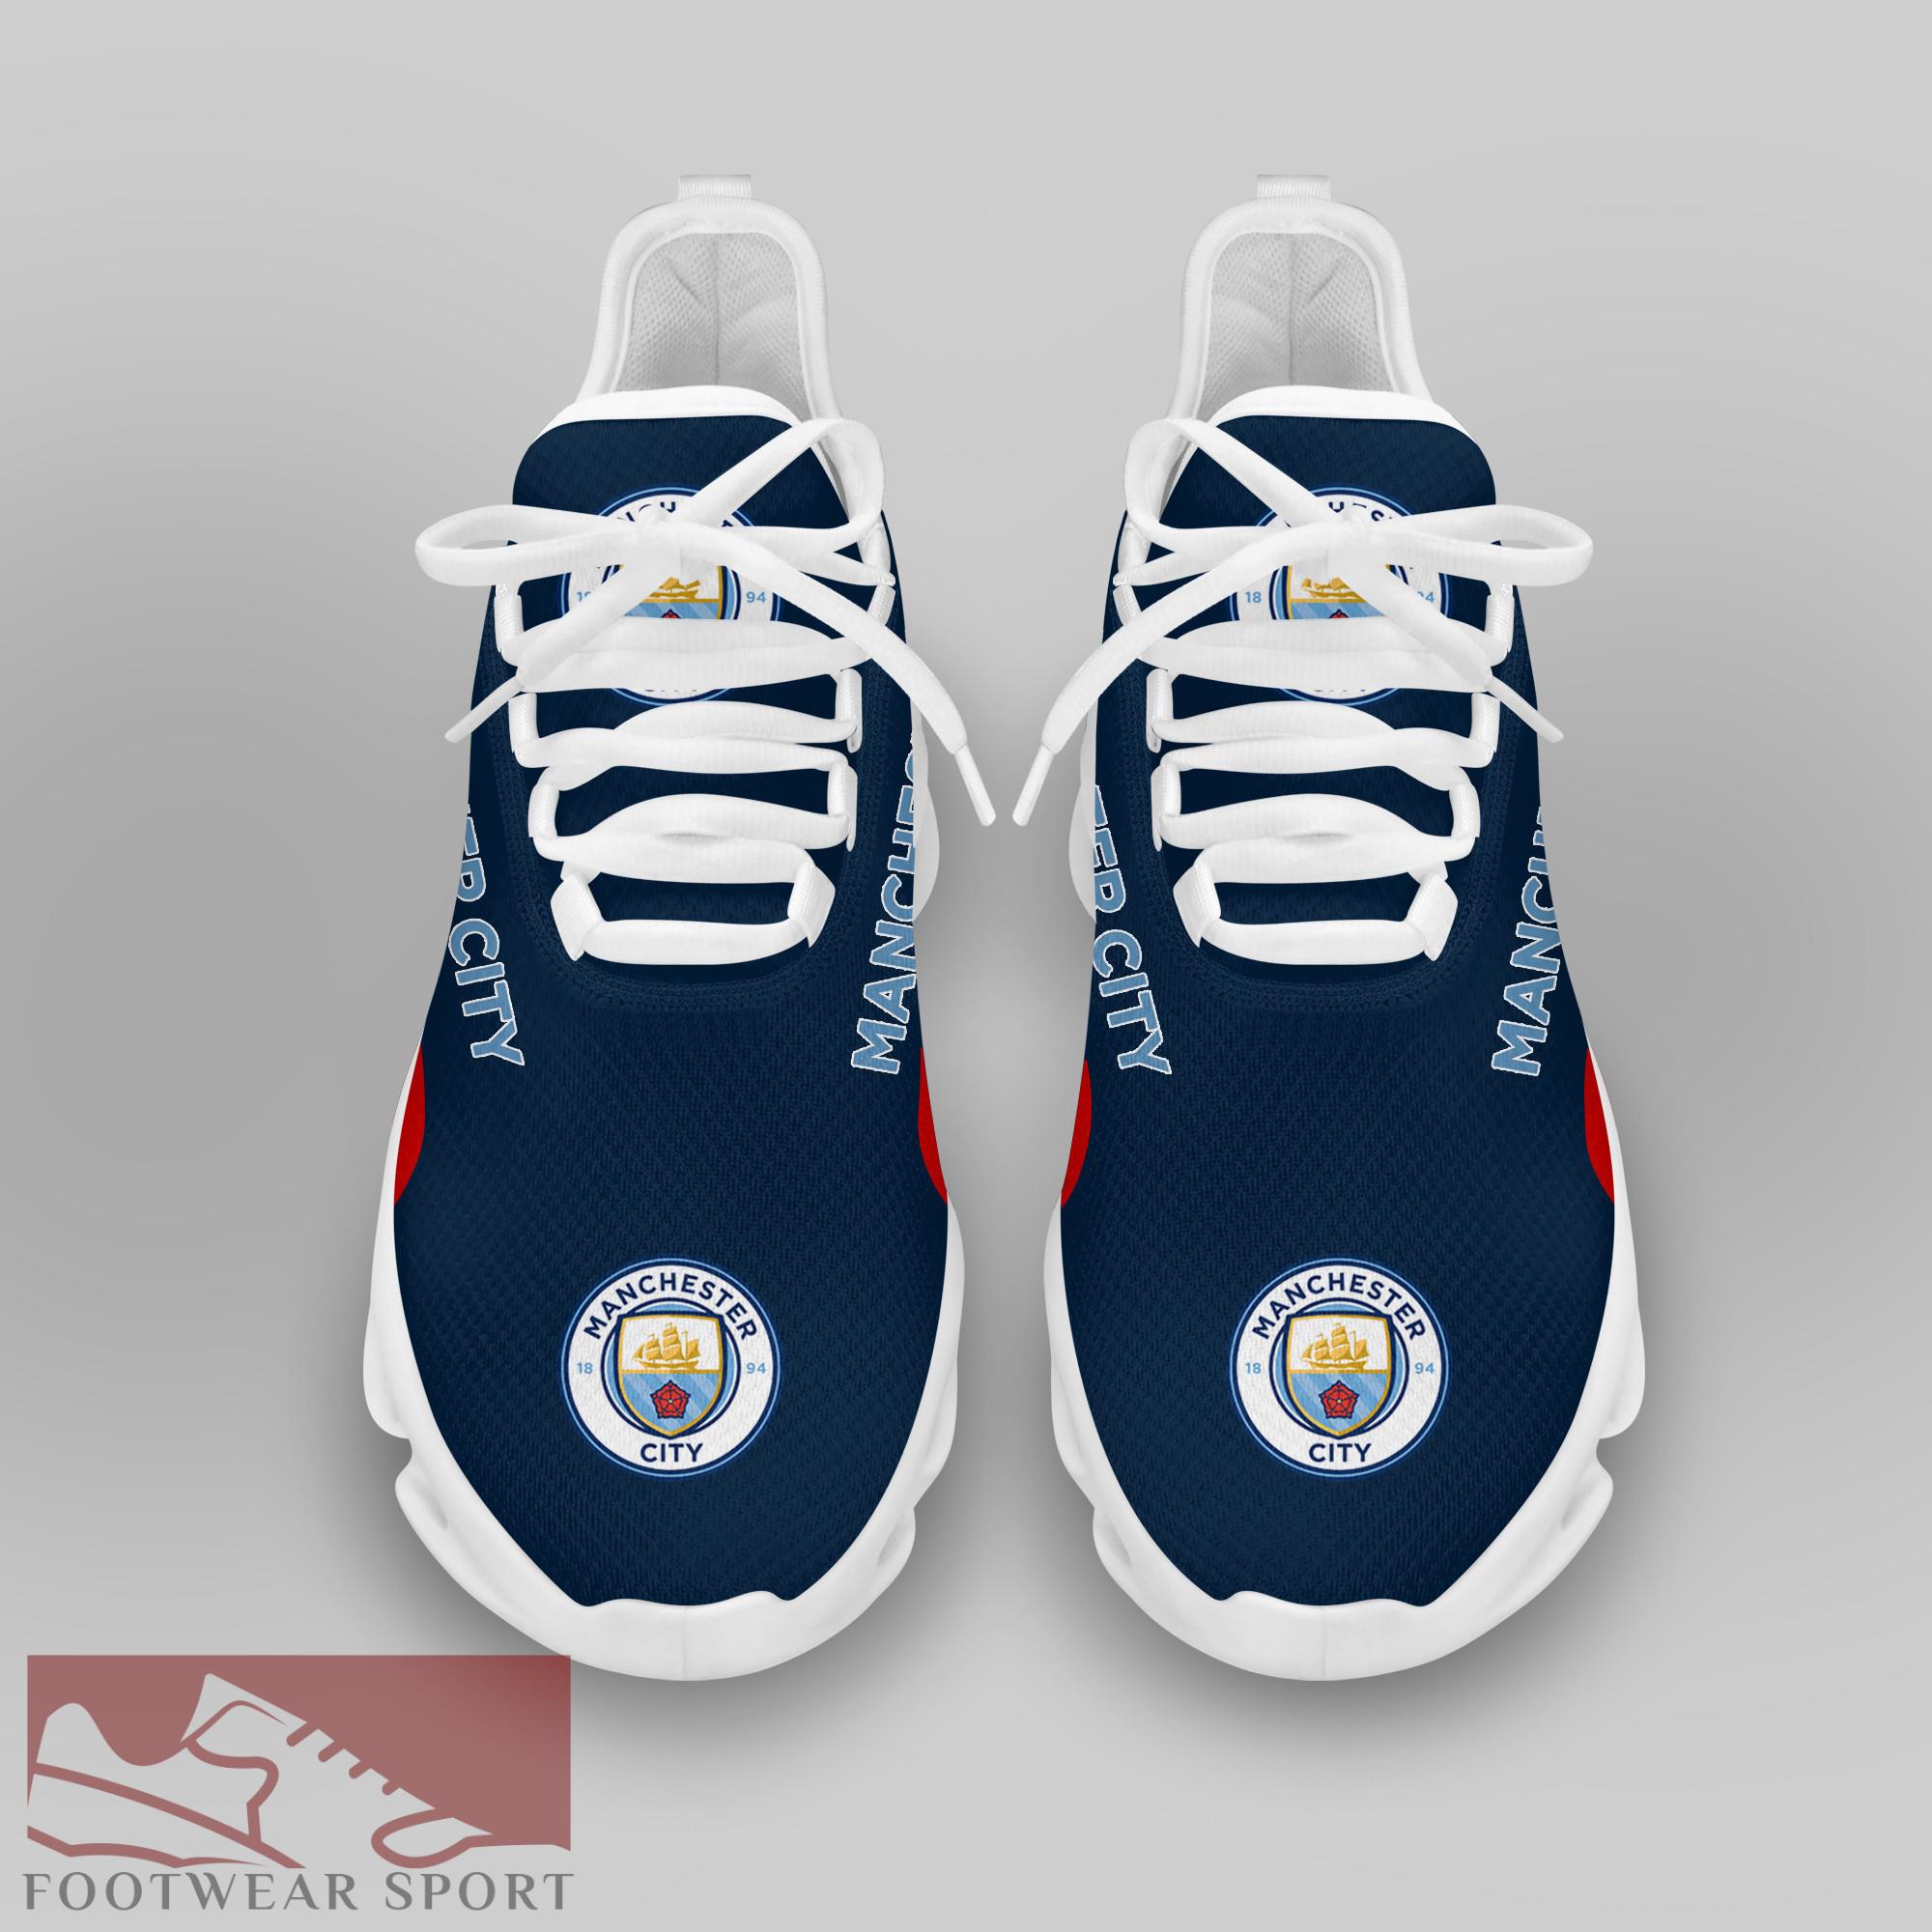 Man City Fans EPL Chunky Sneakers Trendy Max Soul Shoes For Men And Women - Man City Chunky Sneakers White Black Max Soul Shoes For Men And Women Photo 3